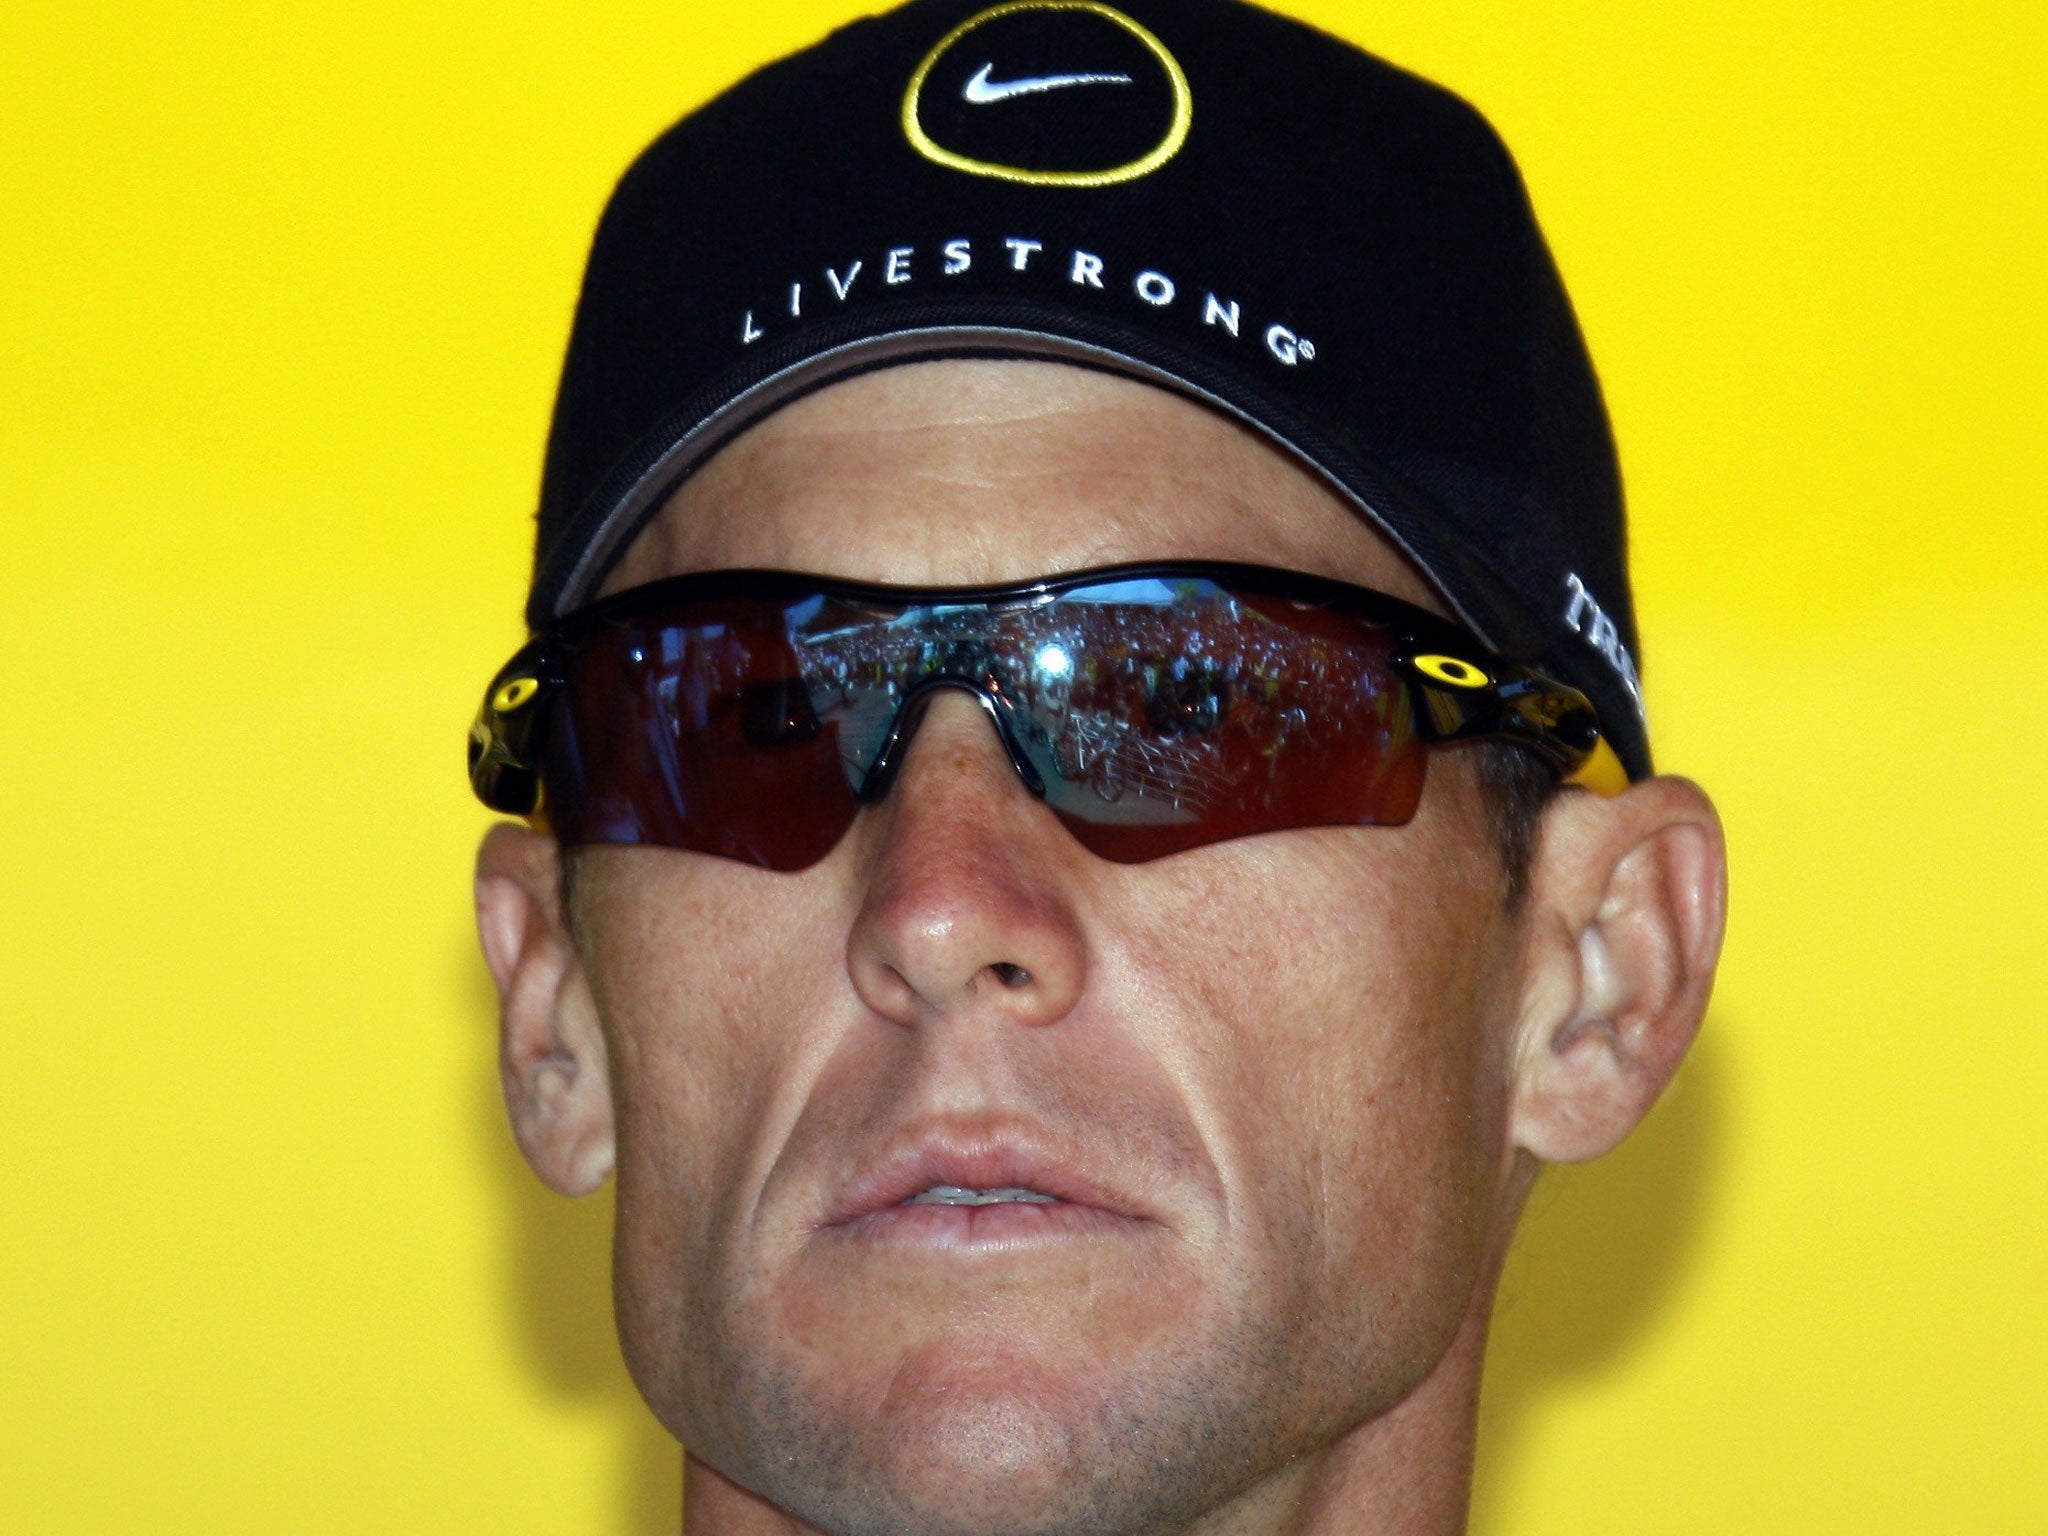 Lance Armstrong: The world's greatest living sportsman who turned out to be a serial cheat